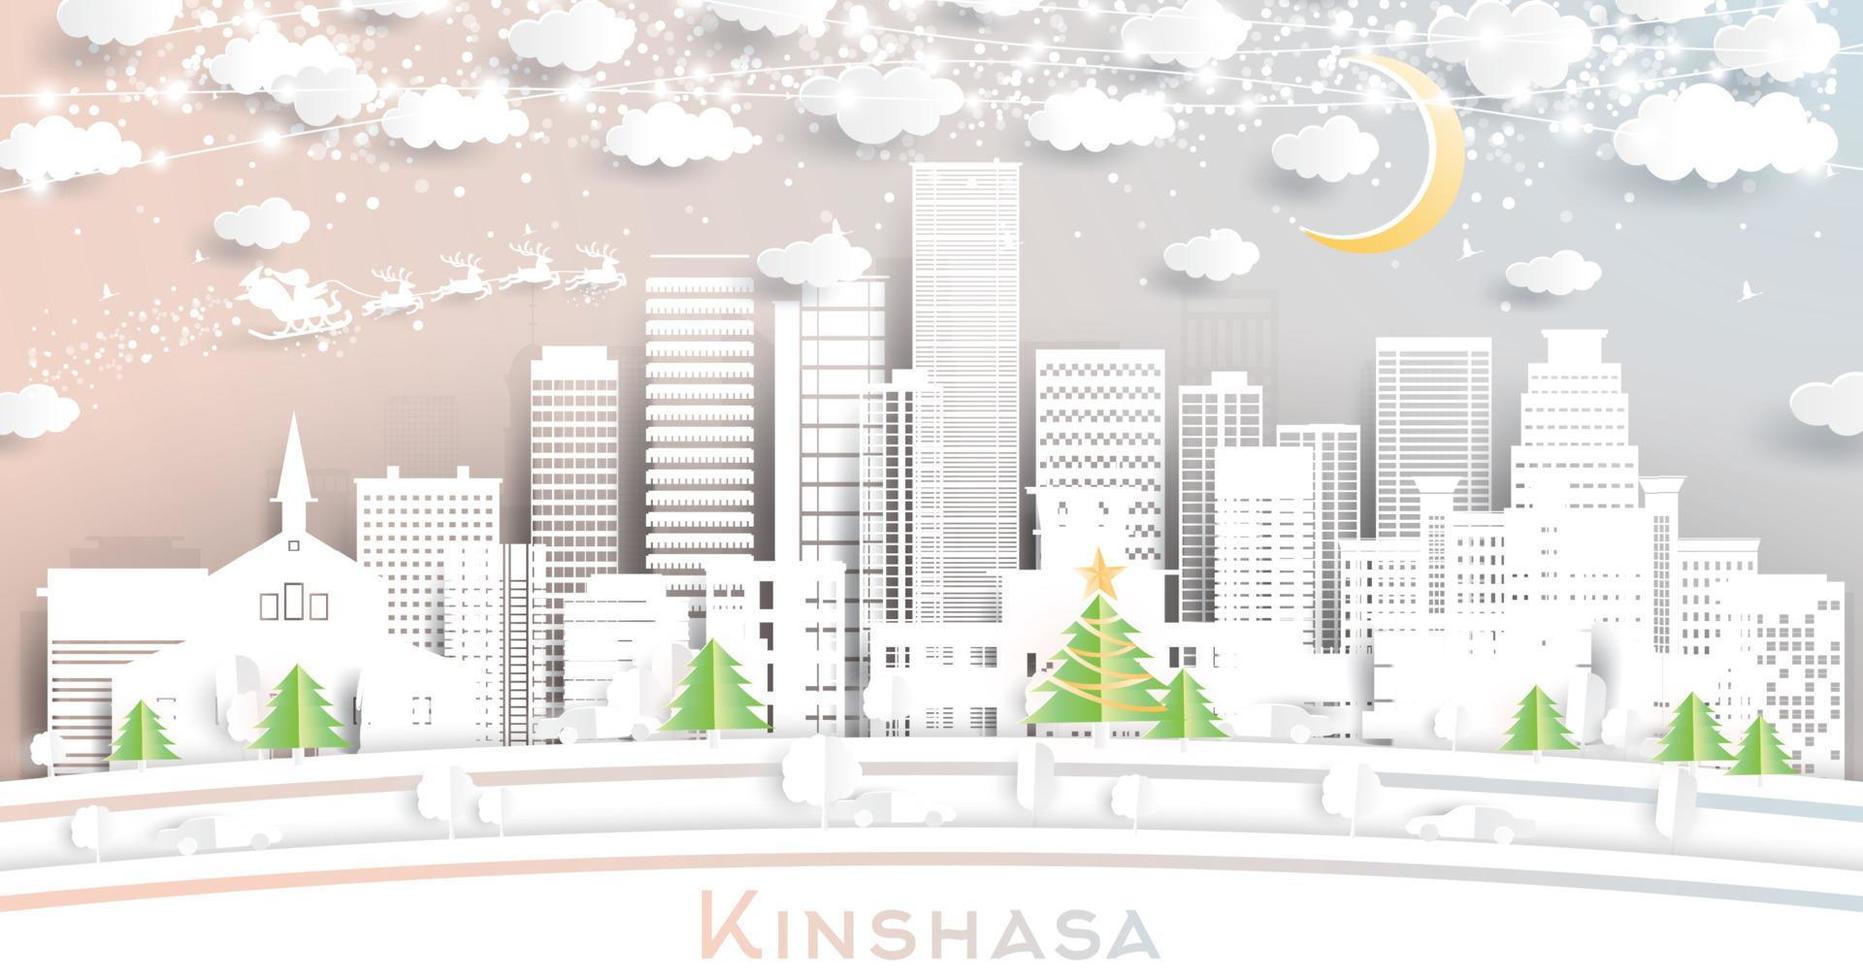 Kinshasa Congo City Skyline in Paper Cut Style with Snowflakes, Moon and Neon Garland. vector